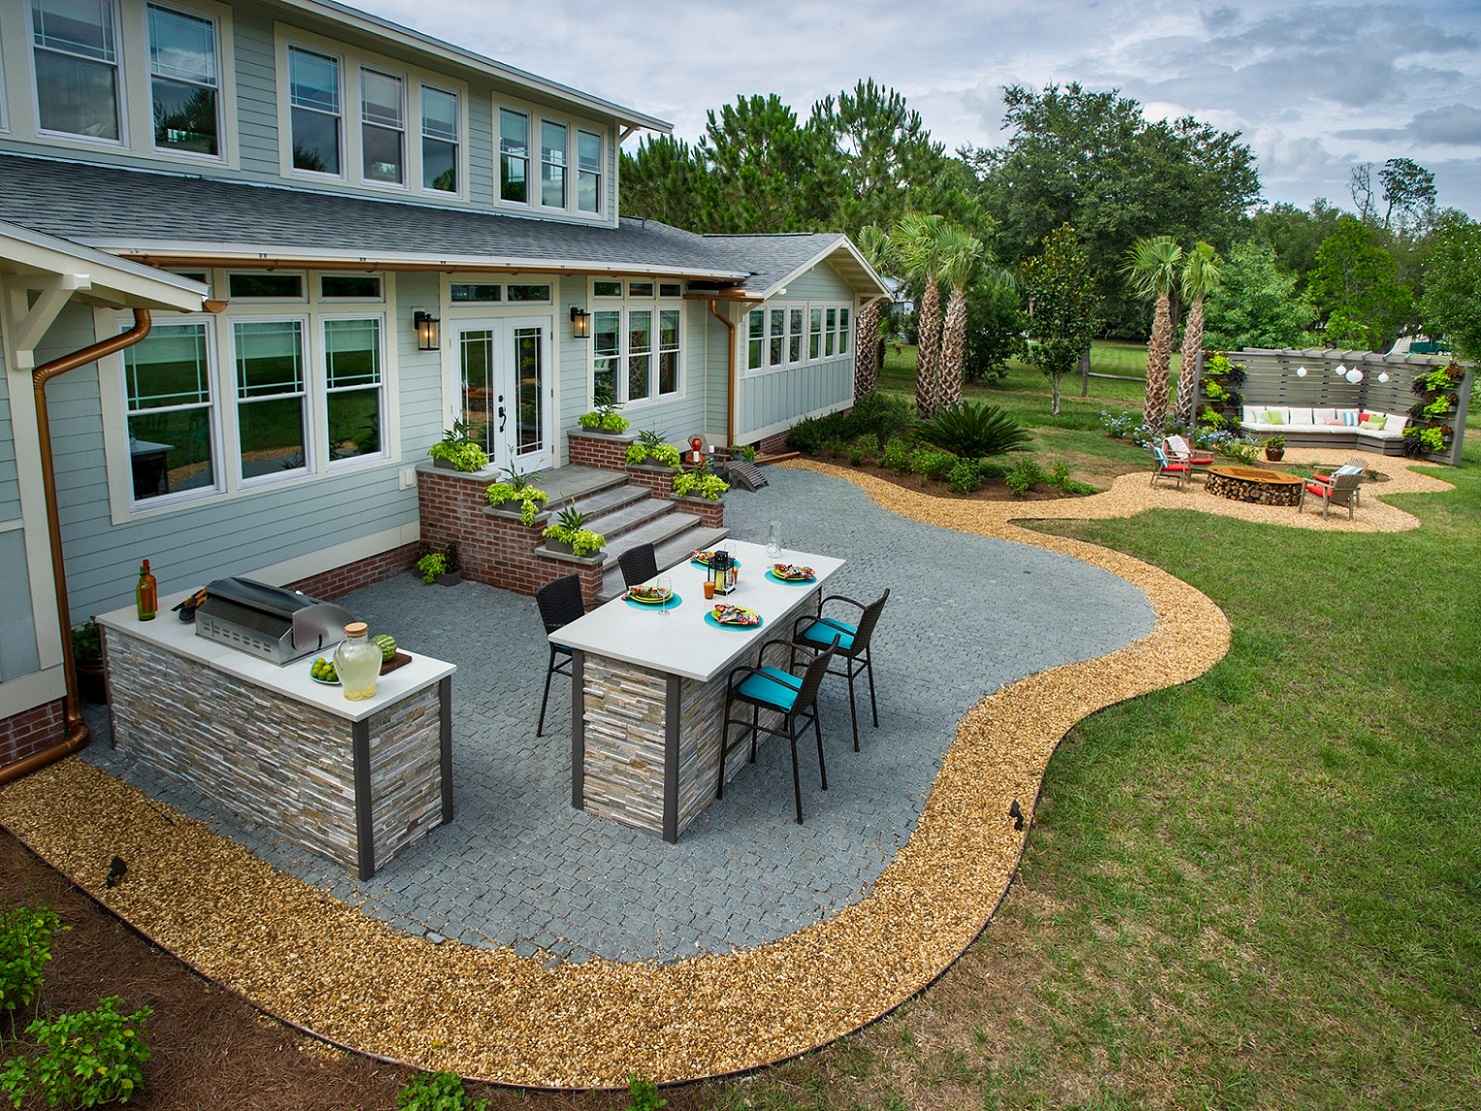 PATIO DESIGN AND ITS BENEFITS